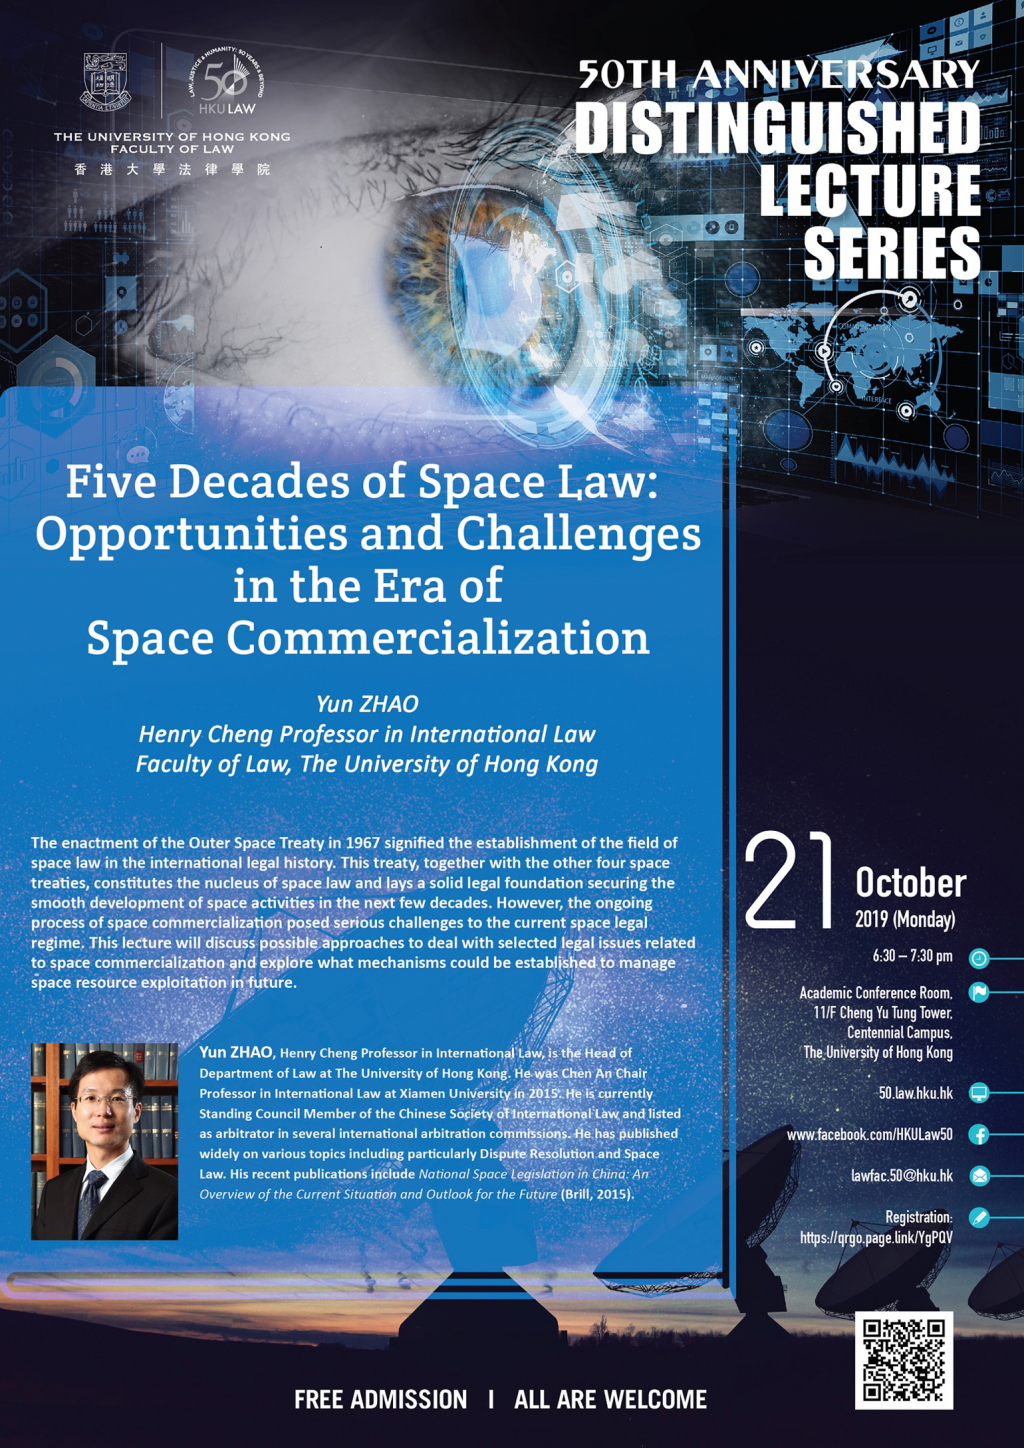 Five Decades of Space Law: Opportunities and Challenges in the Era of Space Commercialization